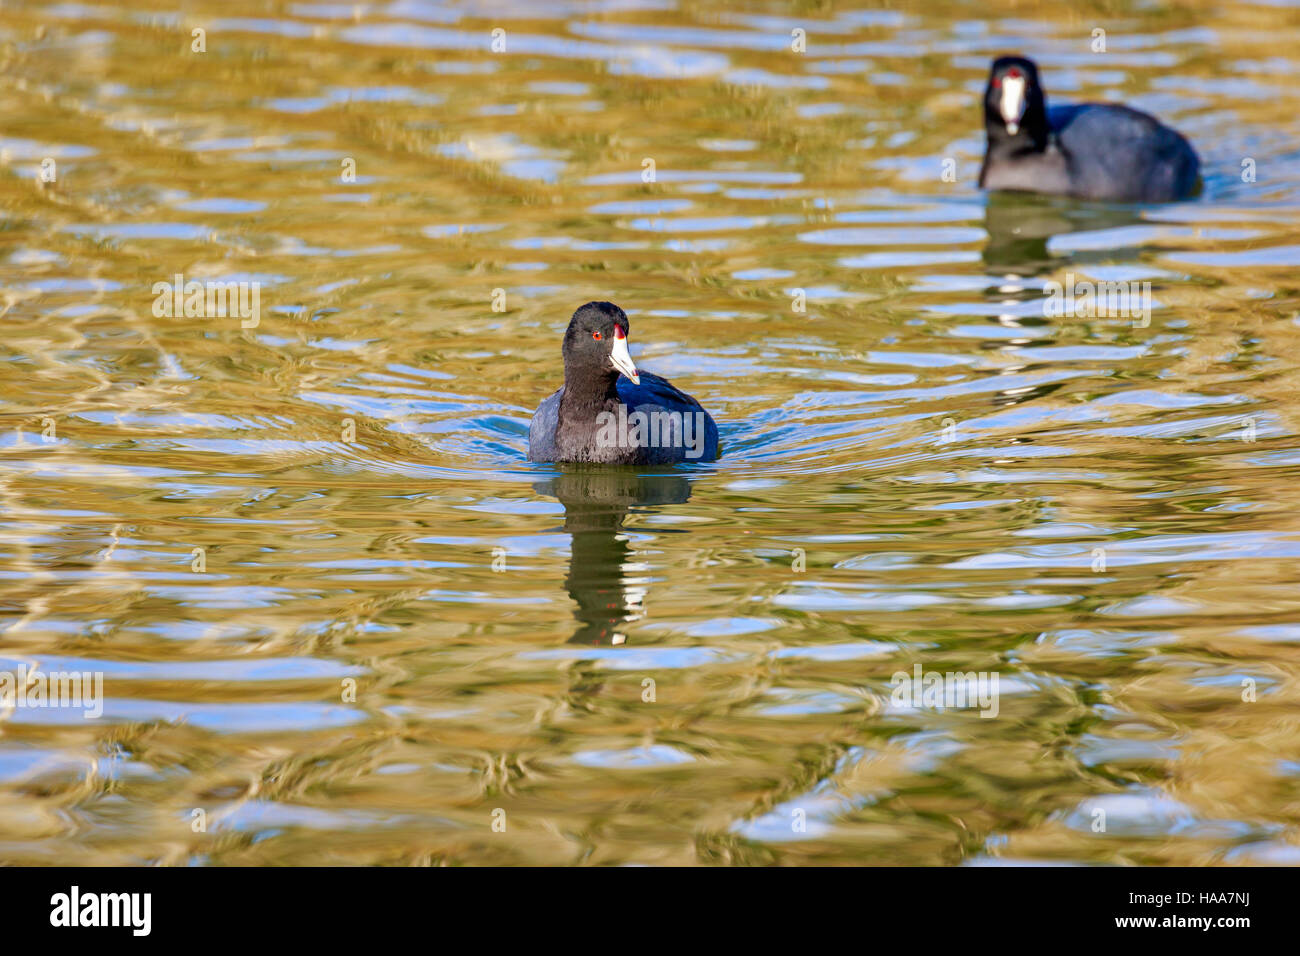 American Coot swim in the lake, with reflection in water. Stock Photo